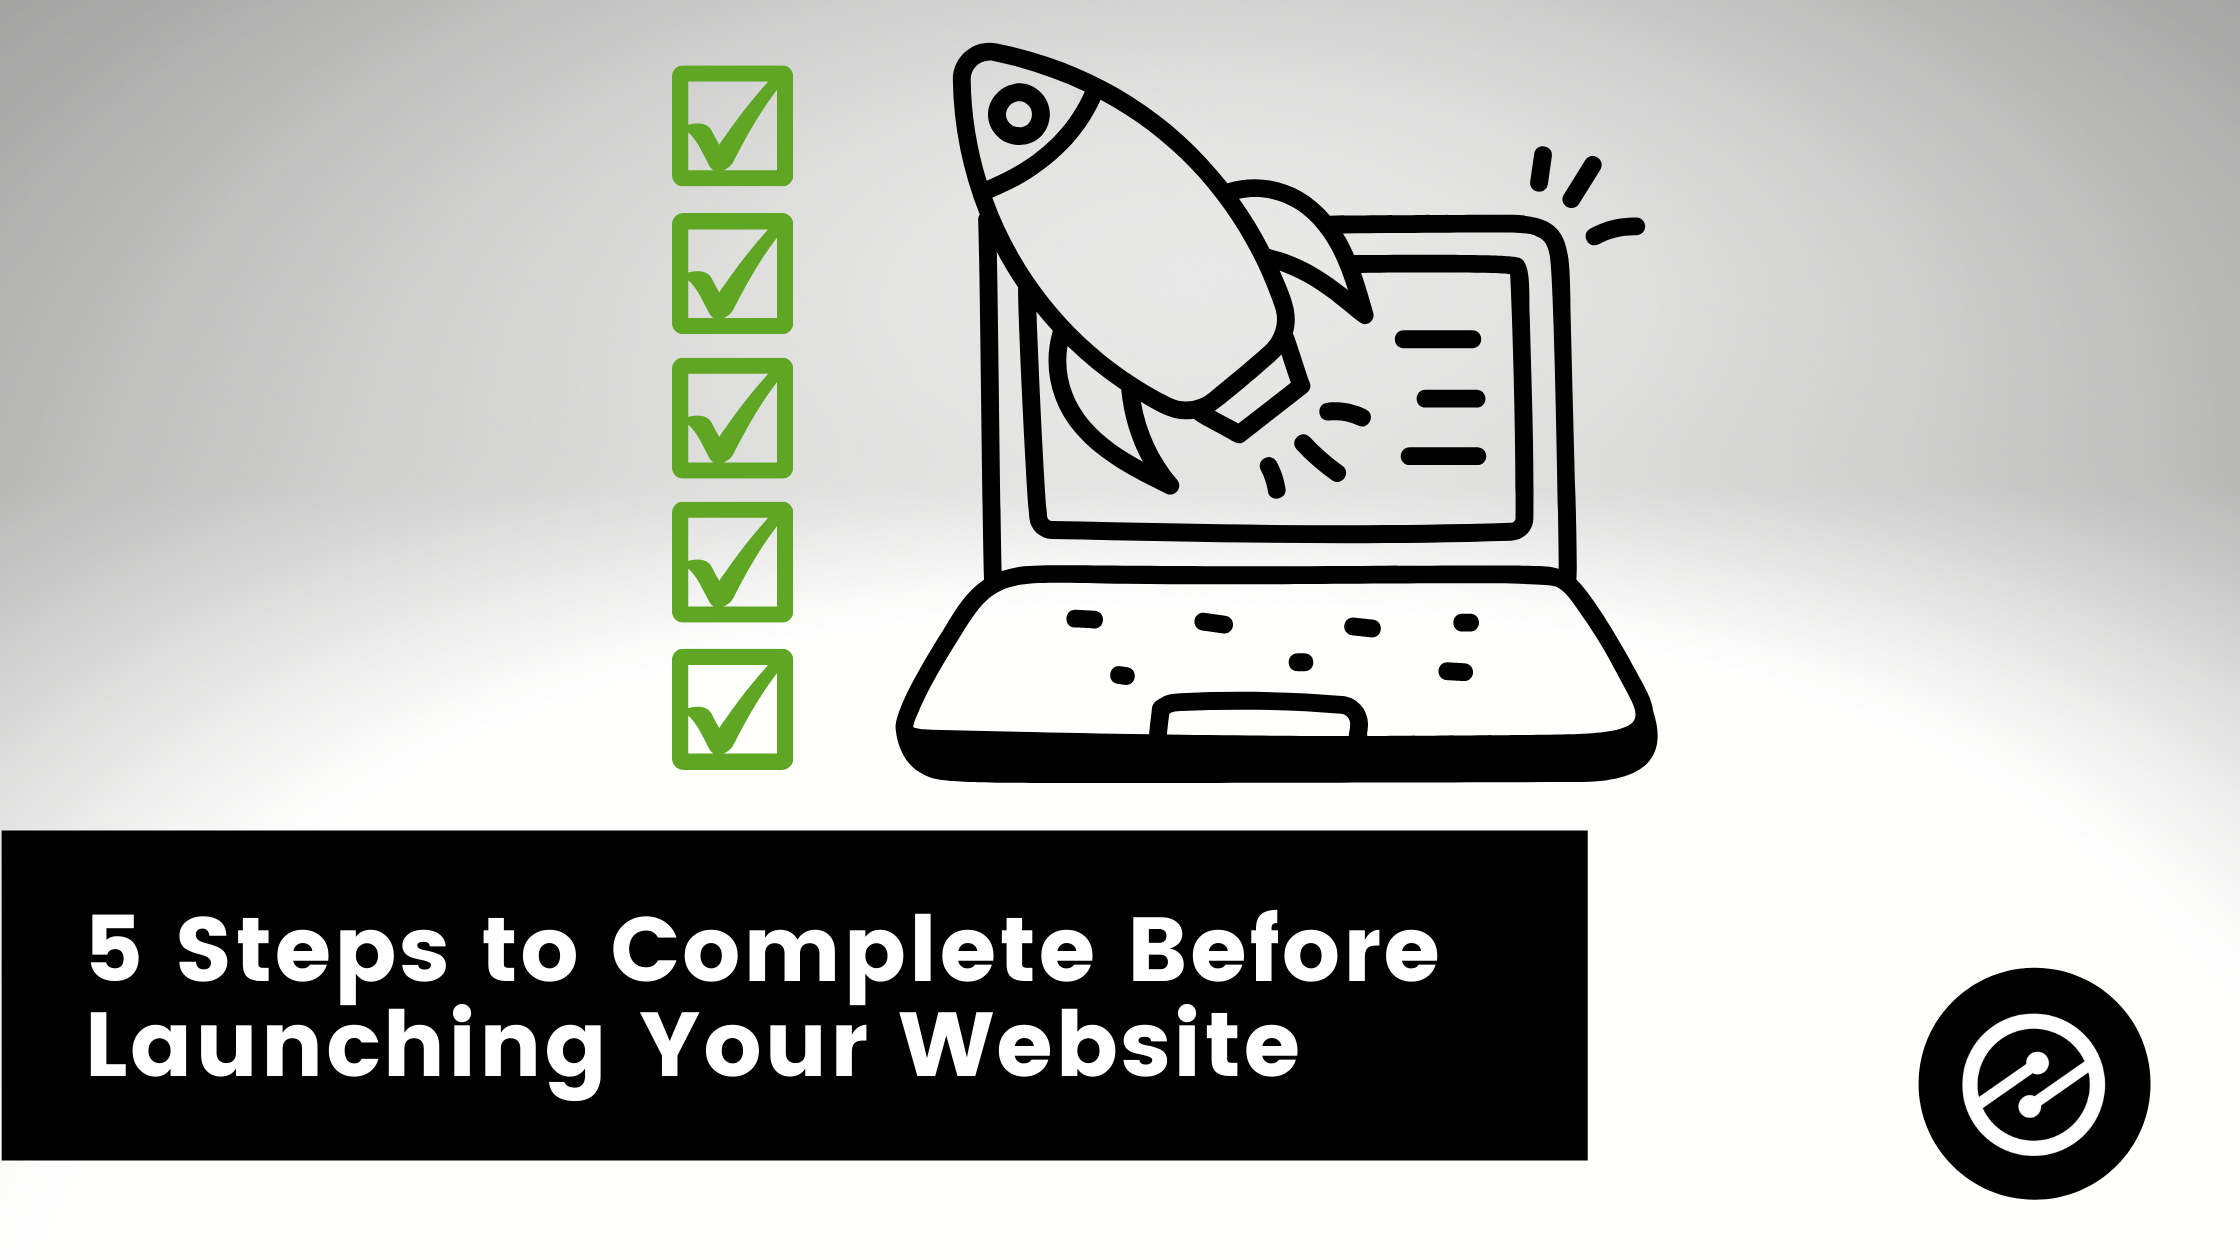 5 Important Steps to Complete Before Launching Your Website